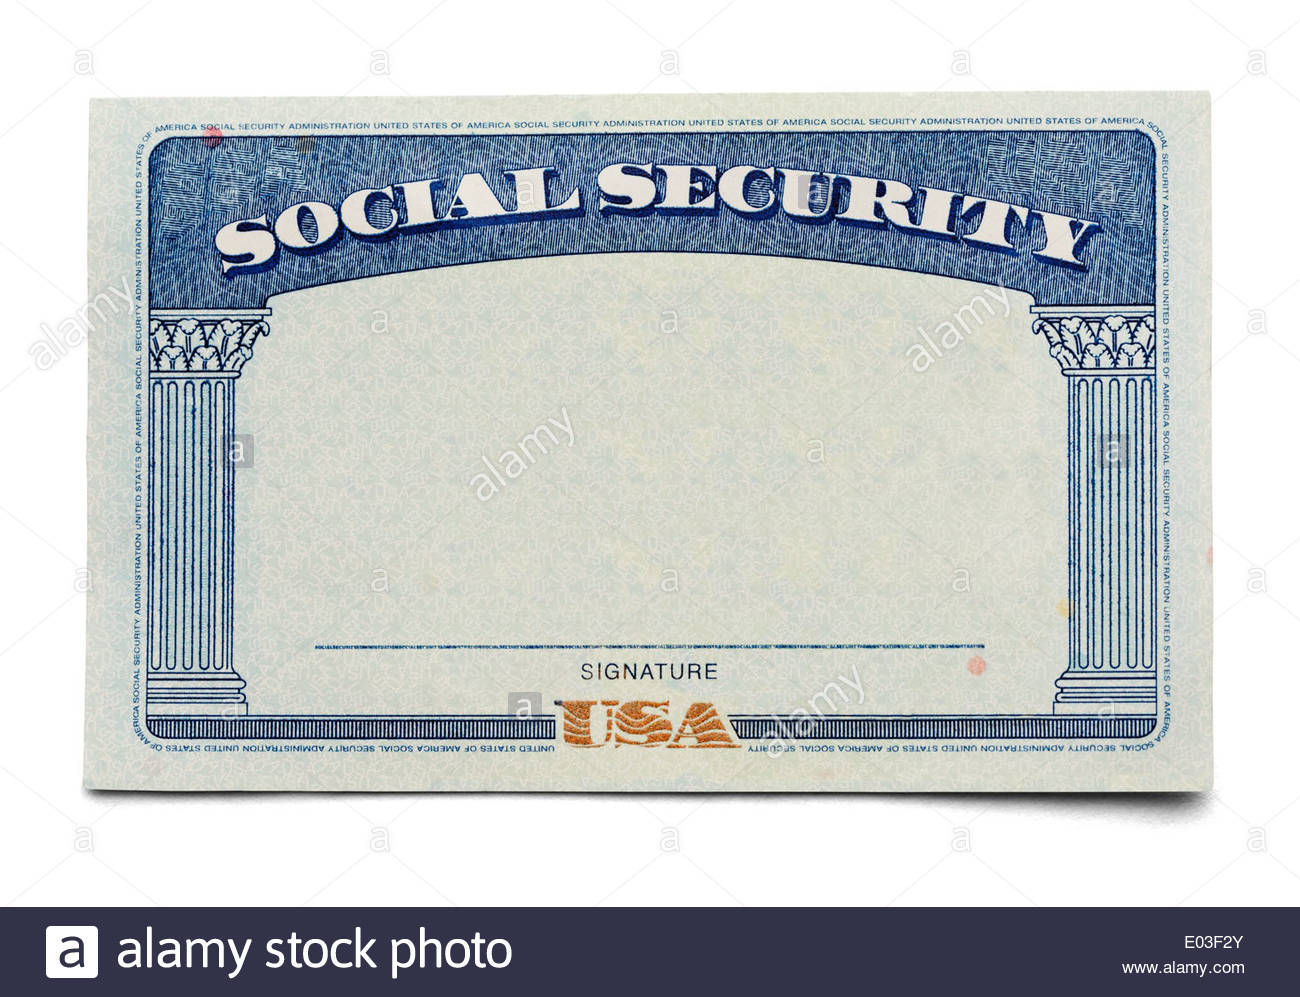 Social Security Stock Photos & Social Security Stock Images For Fake Social Security Card Template Download